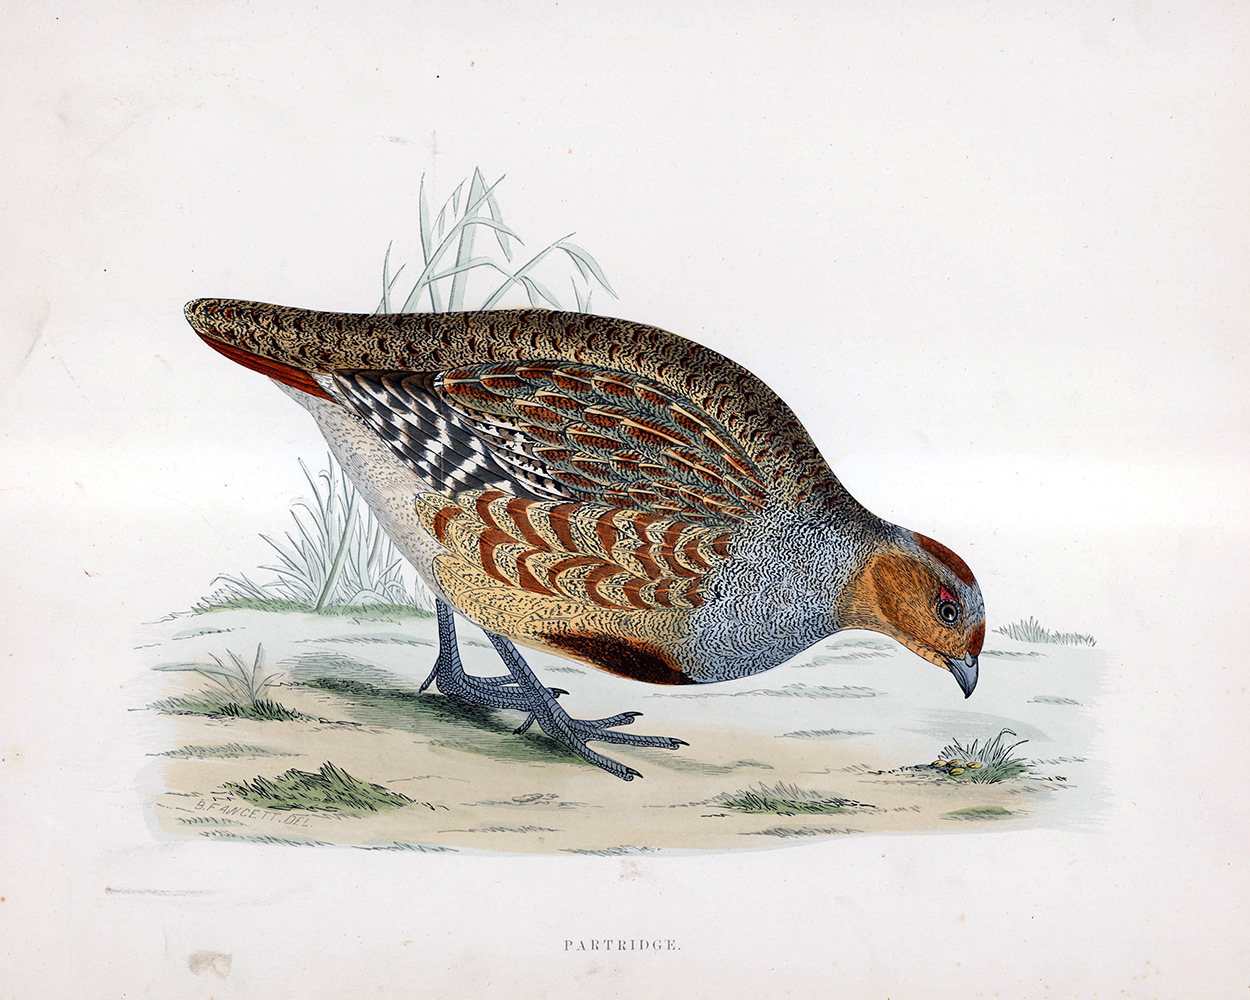 Partridge - hand coloured lithograph 1891 (Print) art by Beverley R Morris Art at The Illustration Art Gallery